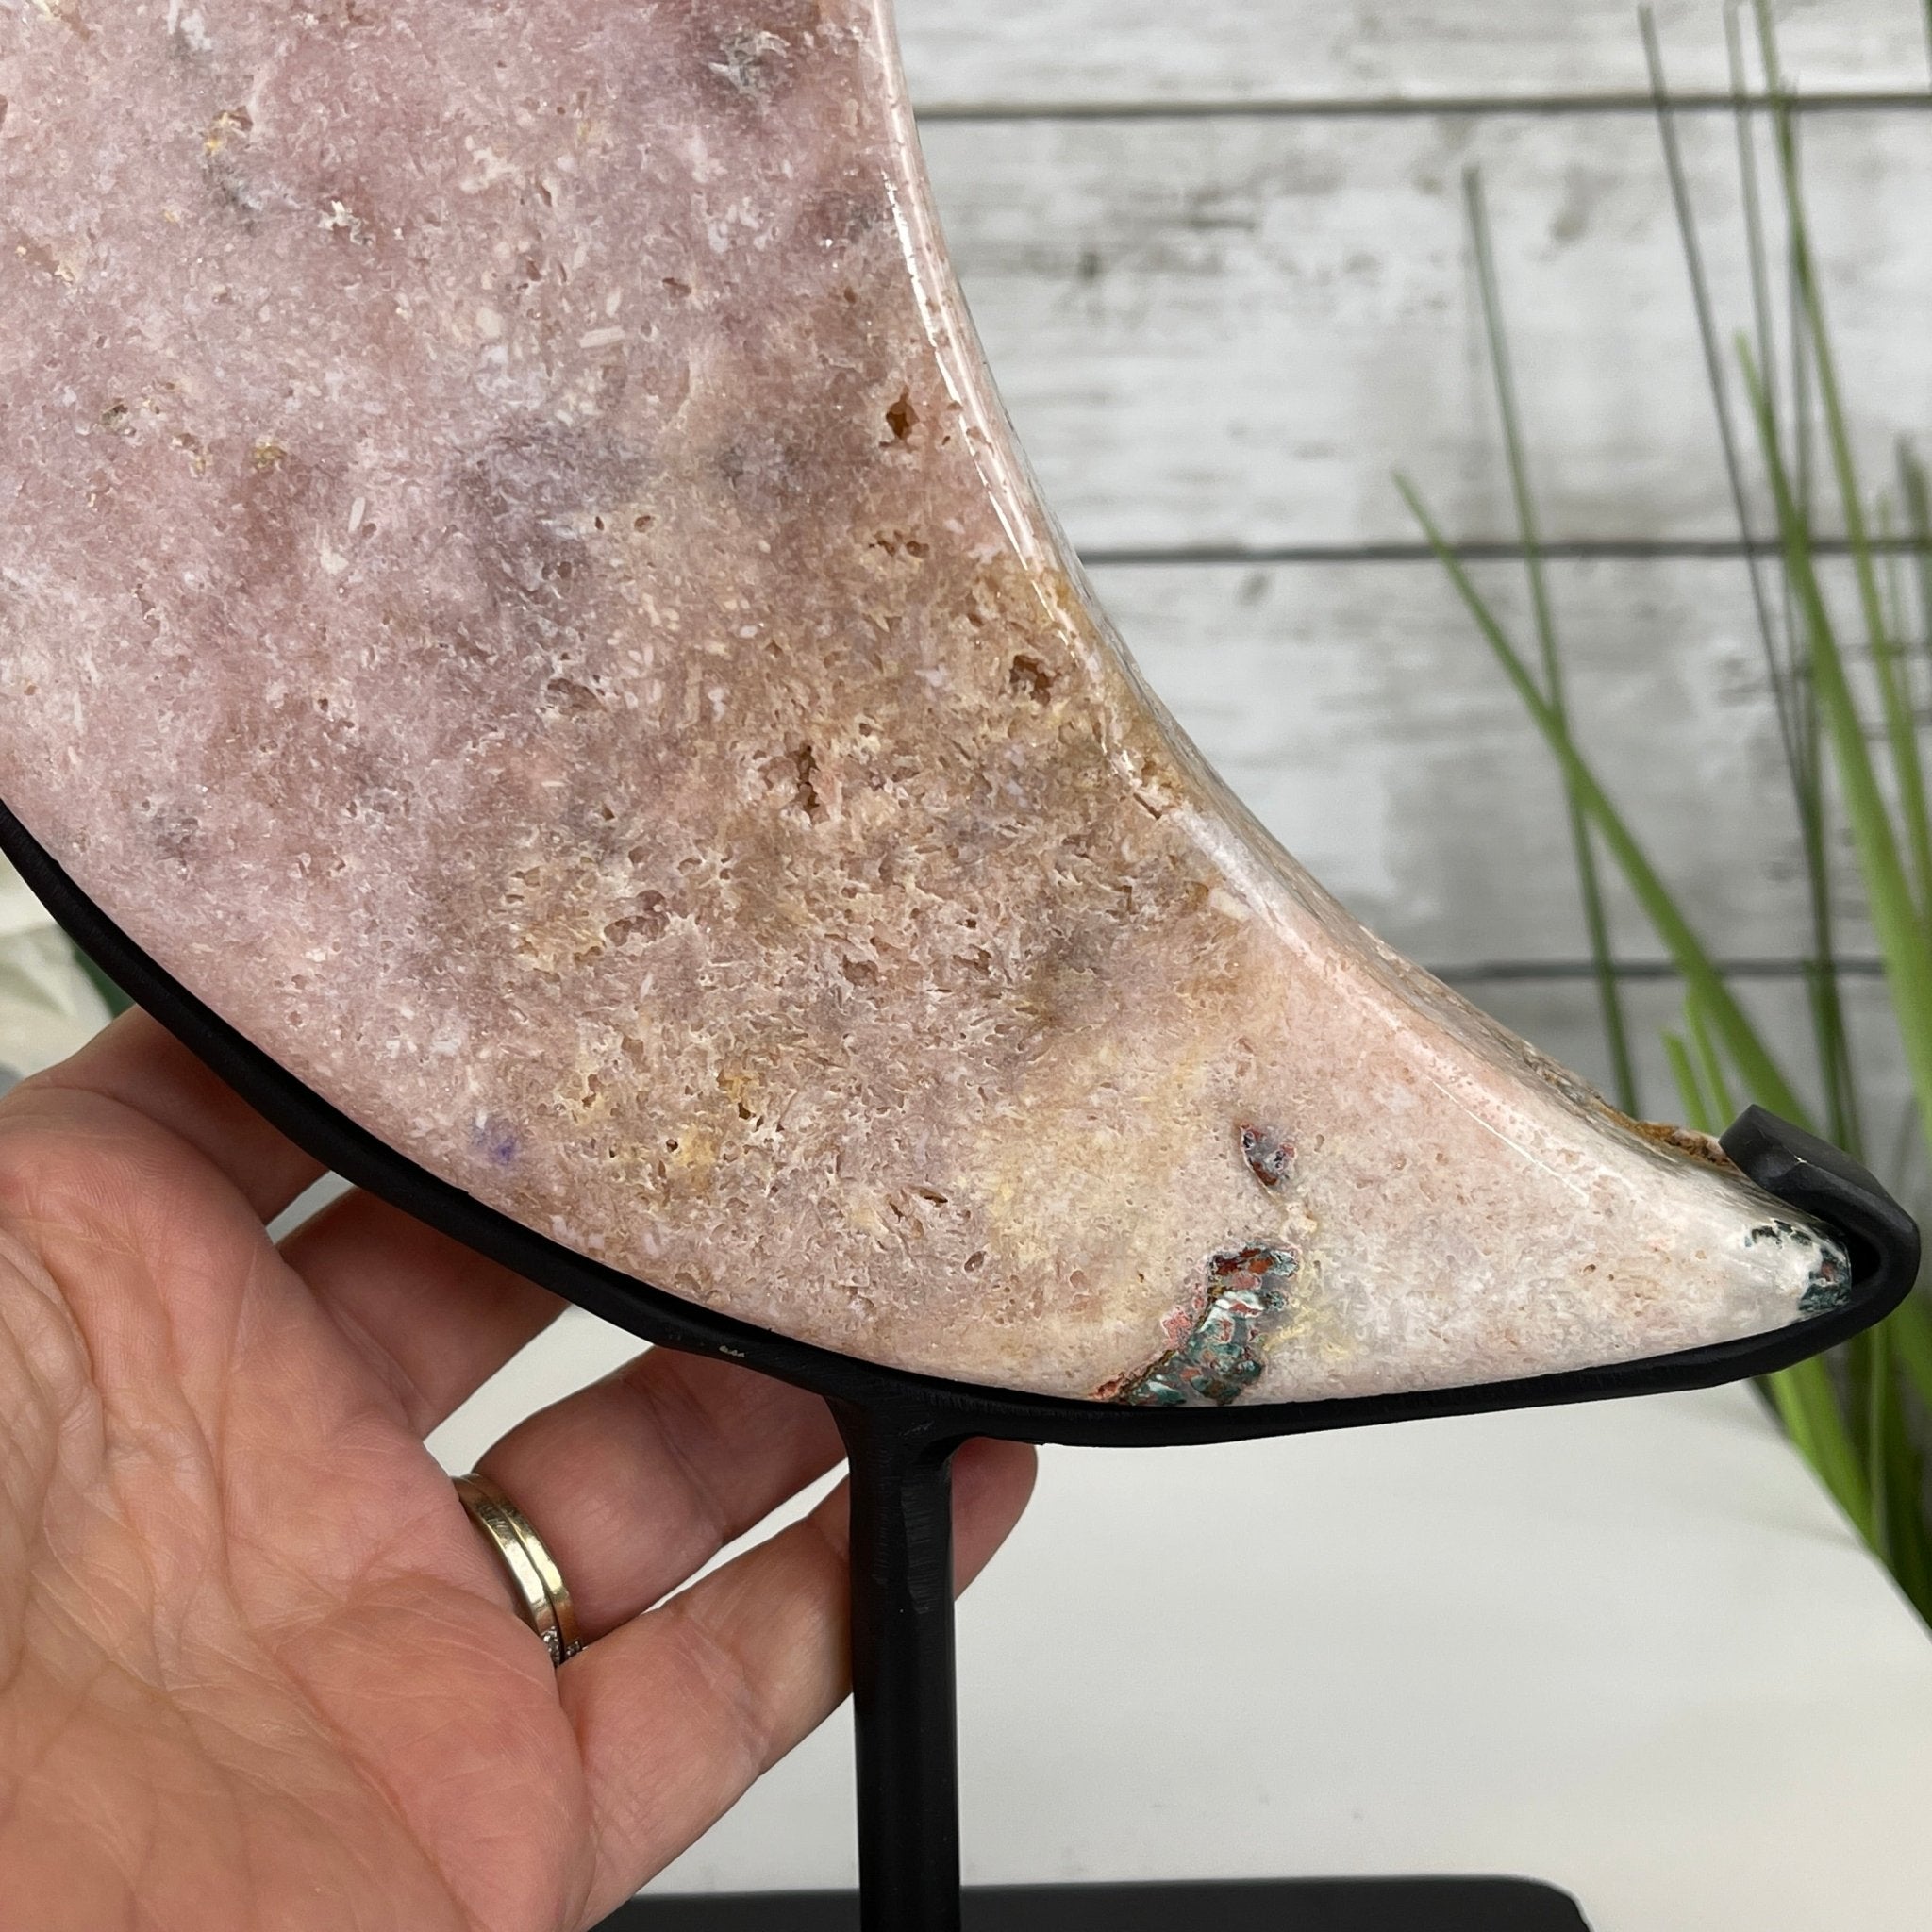 Pink Amethyst Crescent Moon Polished Geode, 5.4 lbs and 13.3" Tall #5740-0027 by Brazil Gems - Brazil GemsBrazil GemsPink Amethyst Crescent Moon Polished Geode, 5.4 lbs and 13.3" Tall #5740-0027 by Brazil GemsCrescent Moons5740-0027